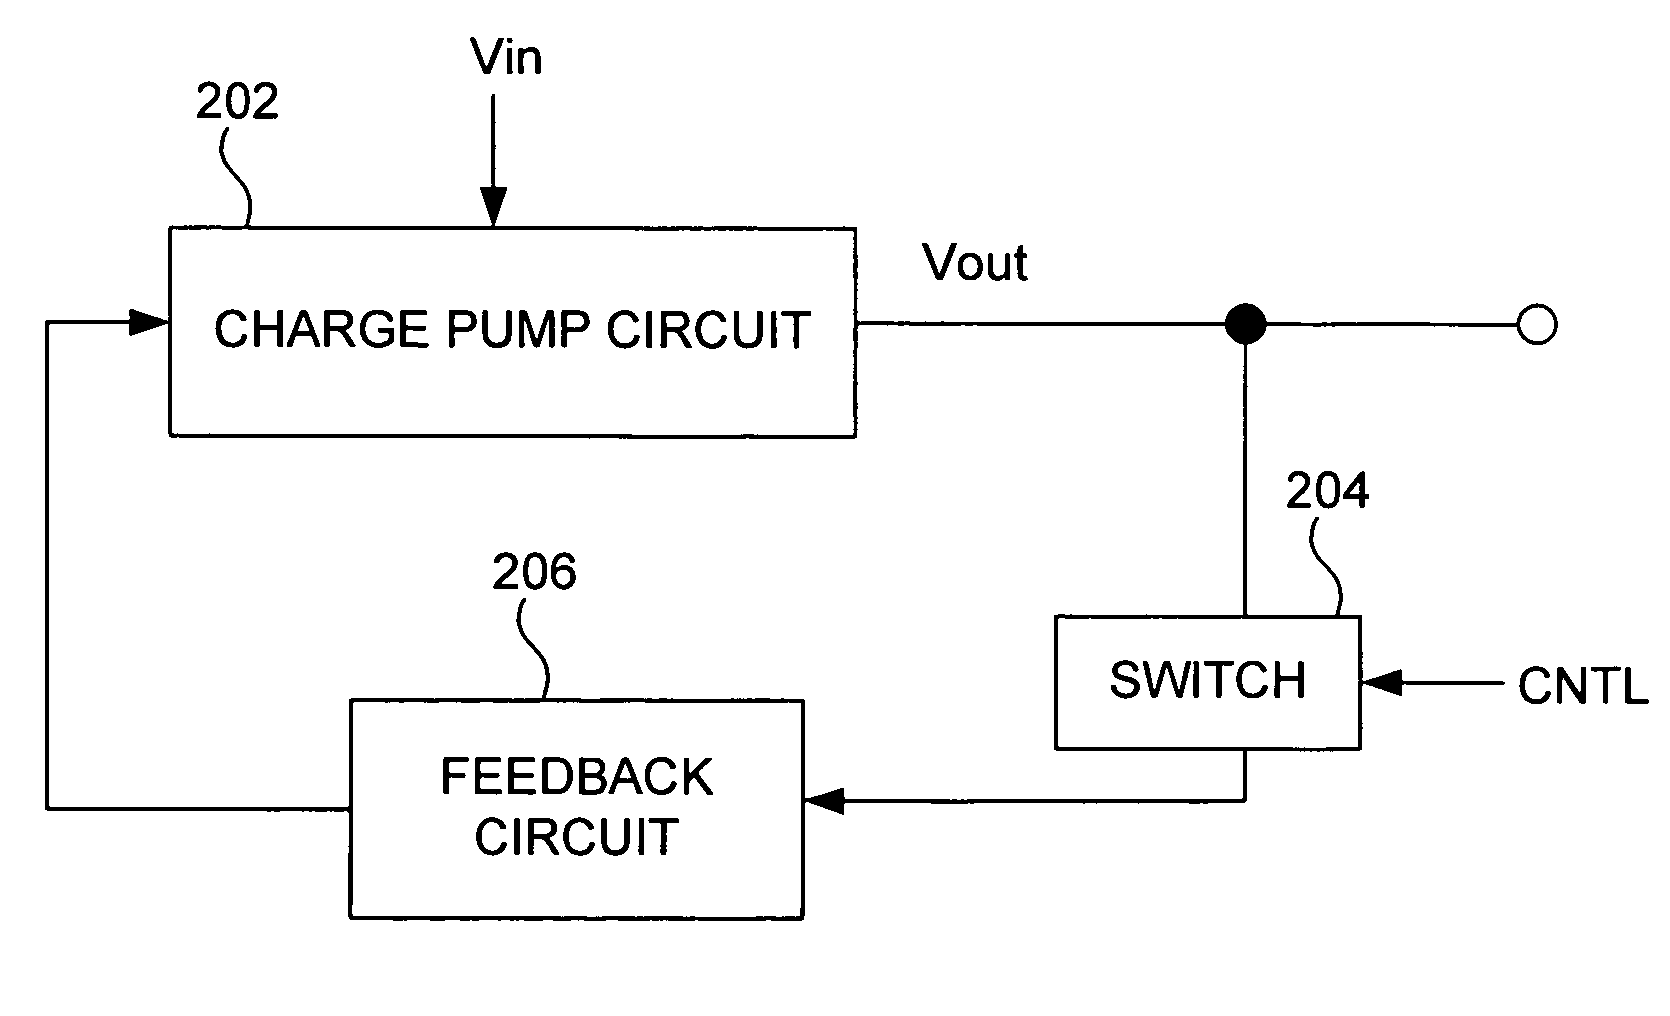 Charge pump regulation control for improved power efficiency